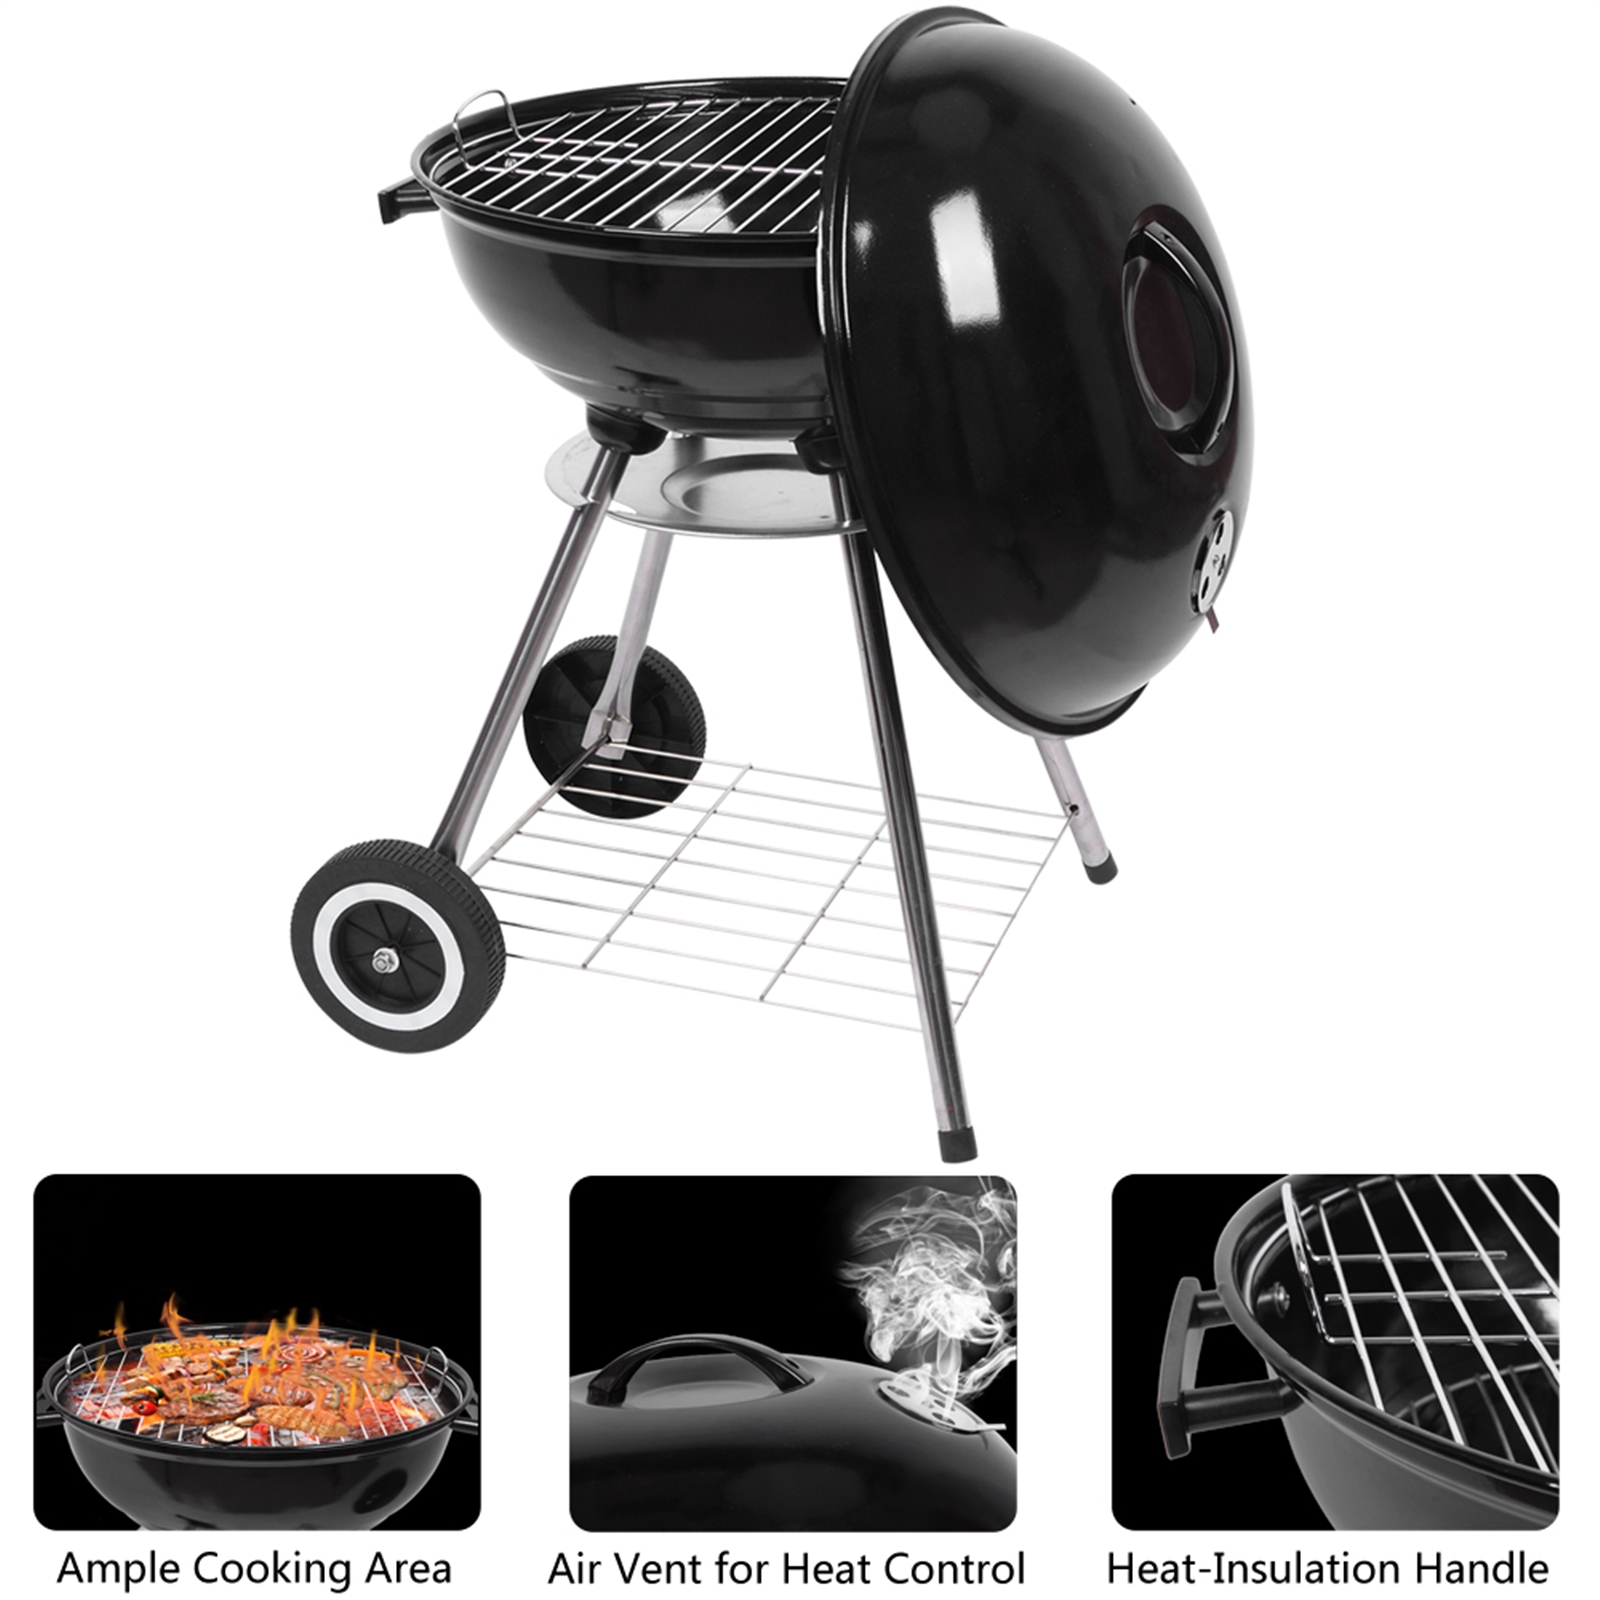 Goorabbit 18 Inch Portable BBQ Grills Clearance Charcoal (Cover Furnace Body) 2 Side Wheels Diameter 5.91" Barbecue Grill Desk Tabletop Outdoor Grill for Camping Picnics Garden Beach Party,Black - image 5 of 14